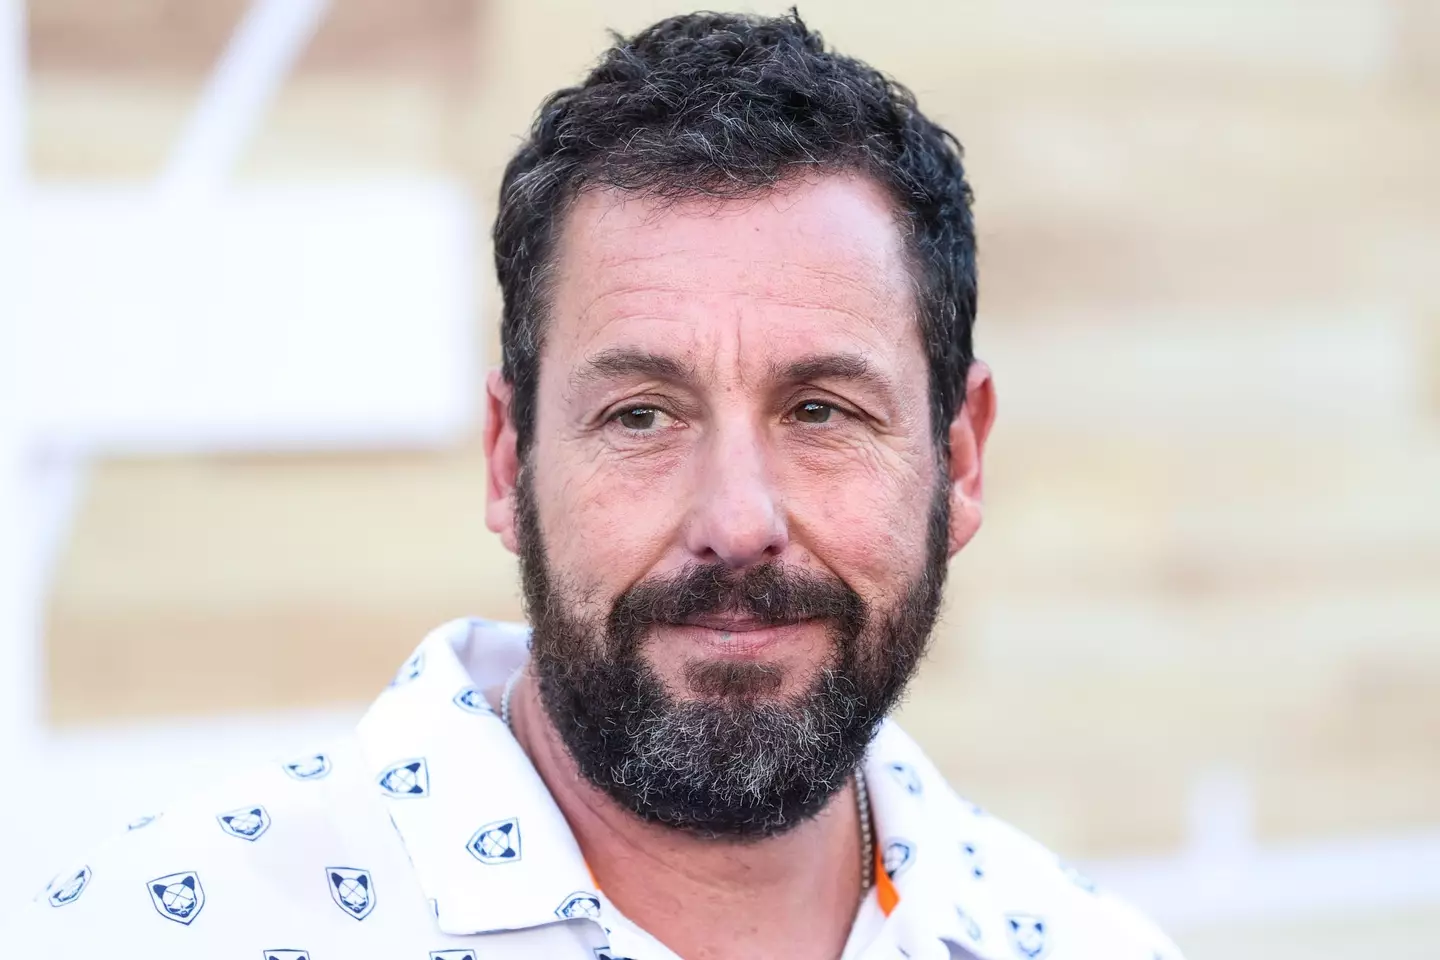 Sandler was once told he wasn't cut out for acting.